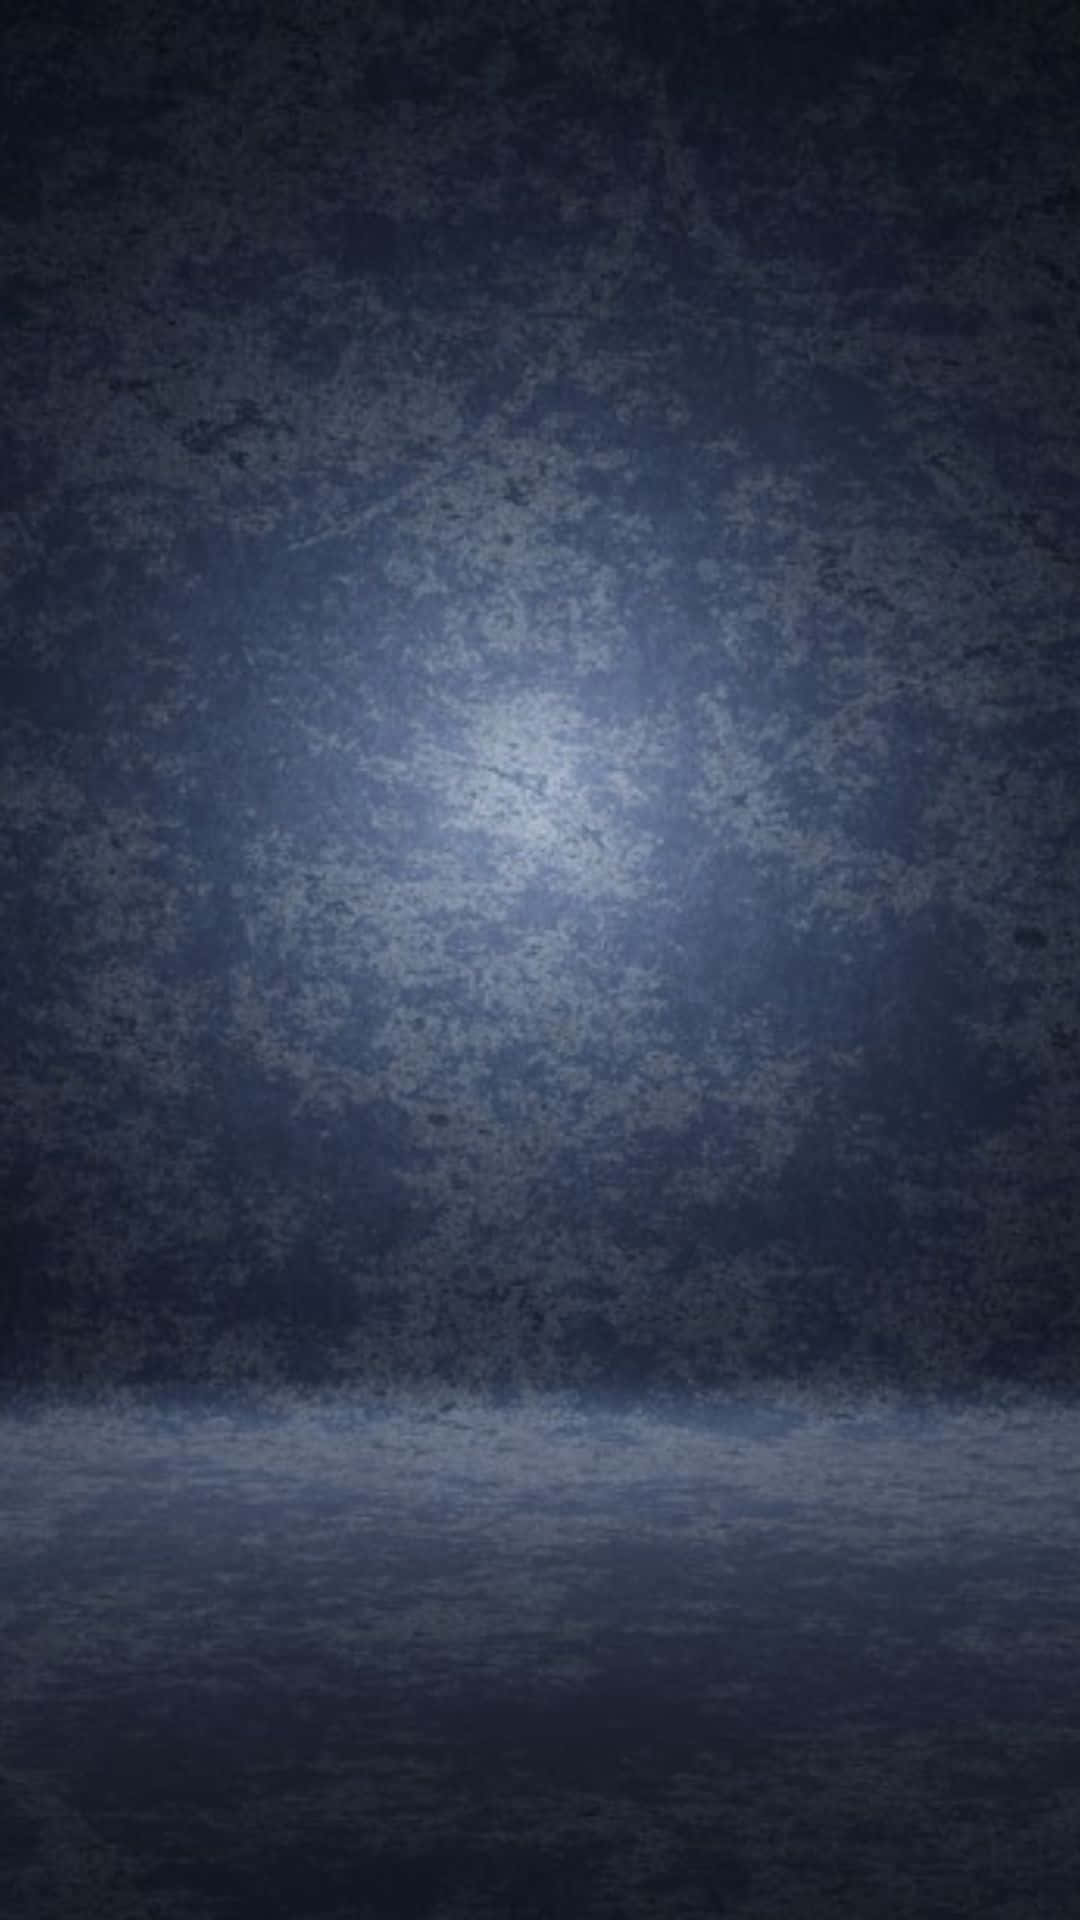 A Dark Blue Background With A Light Shining On It